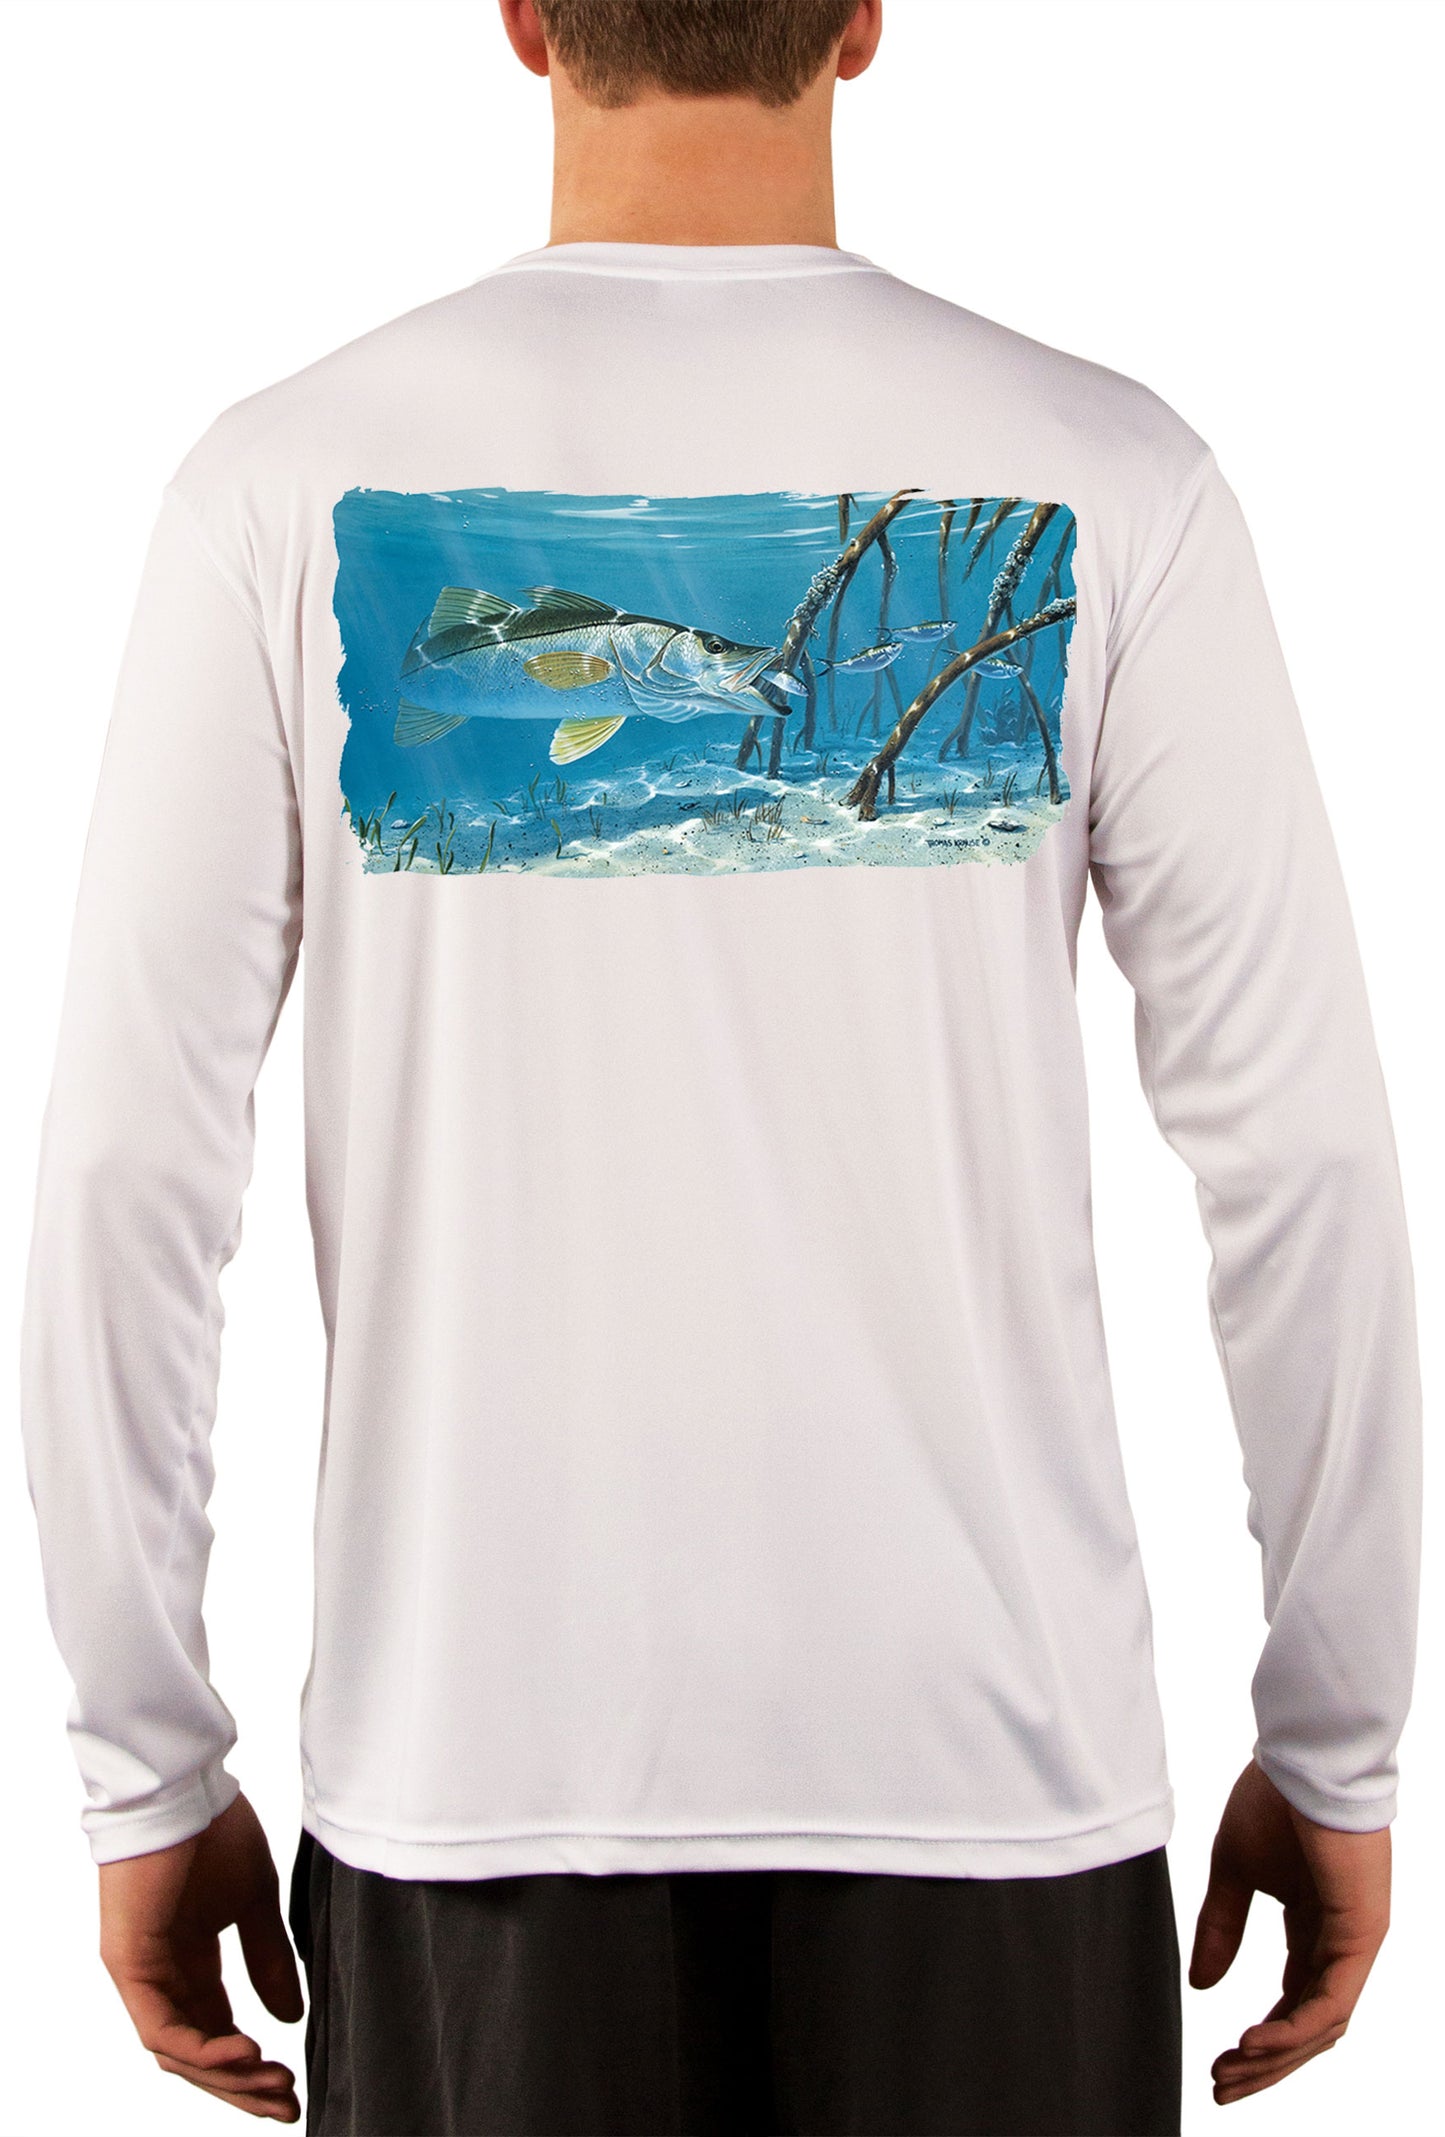 Mangrove Snook Fishing Shirts for Men with Snook Scale Sleeve - Skiff Life